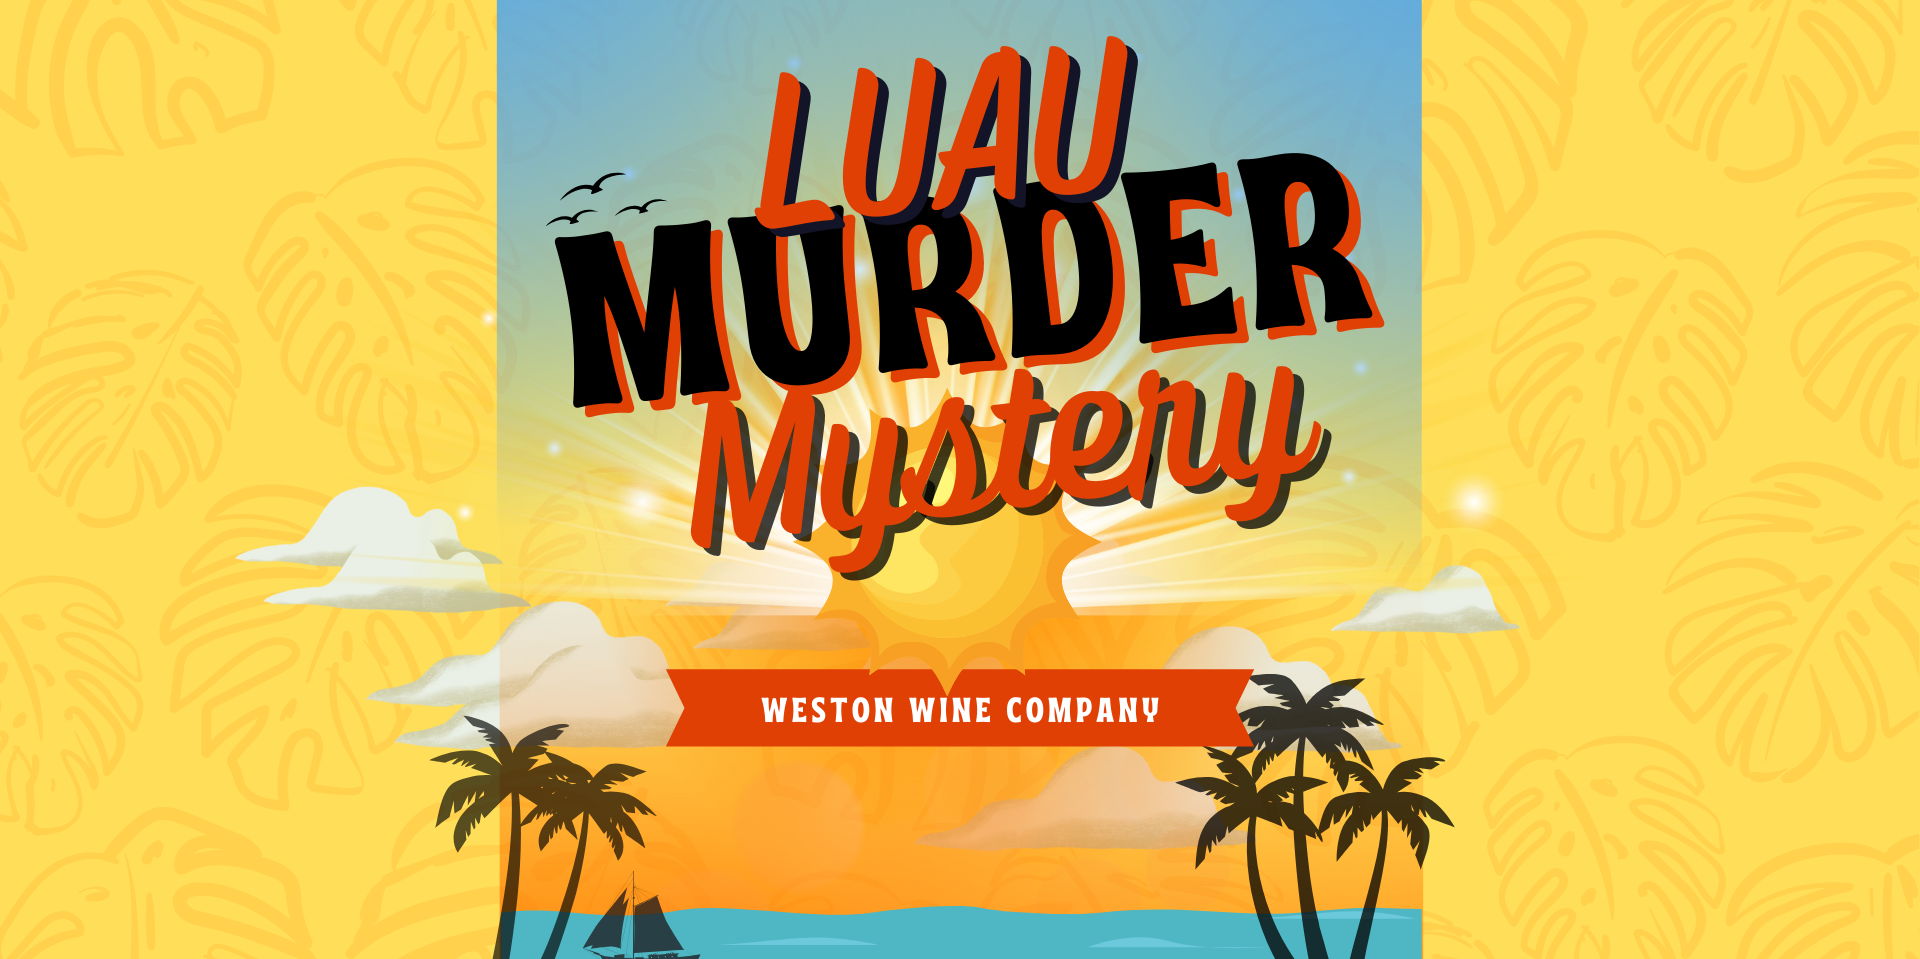 Luau Murder Mystery Party promotional image